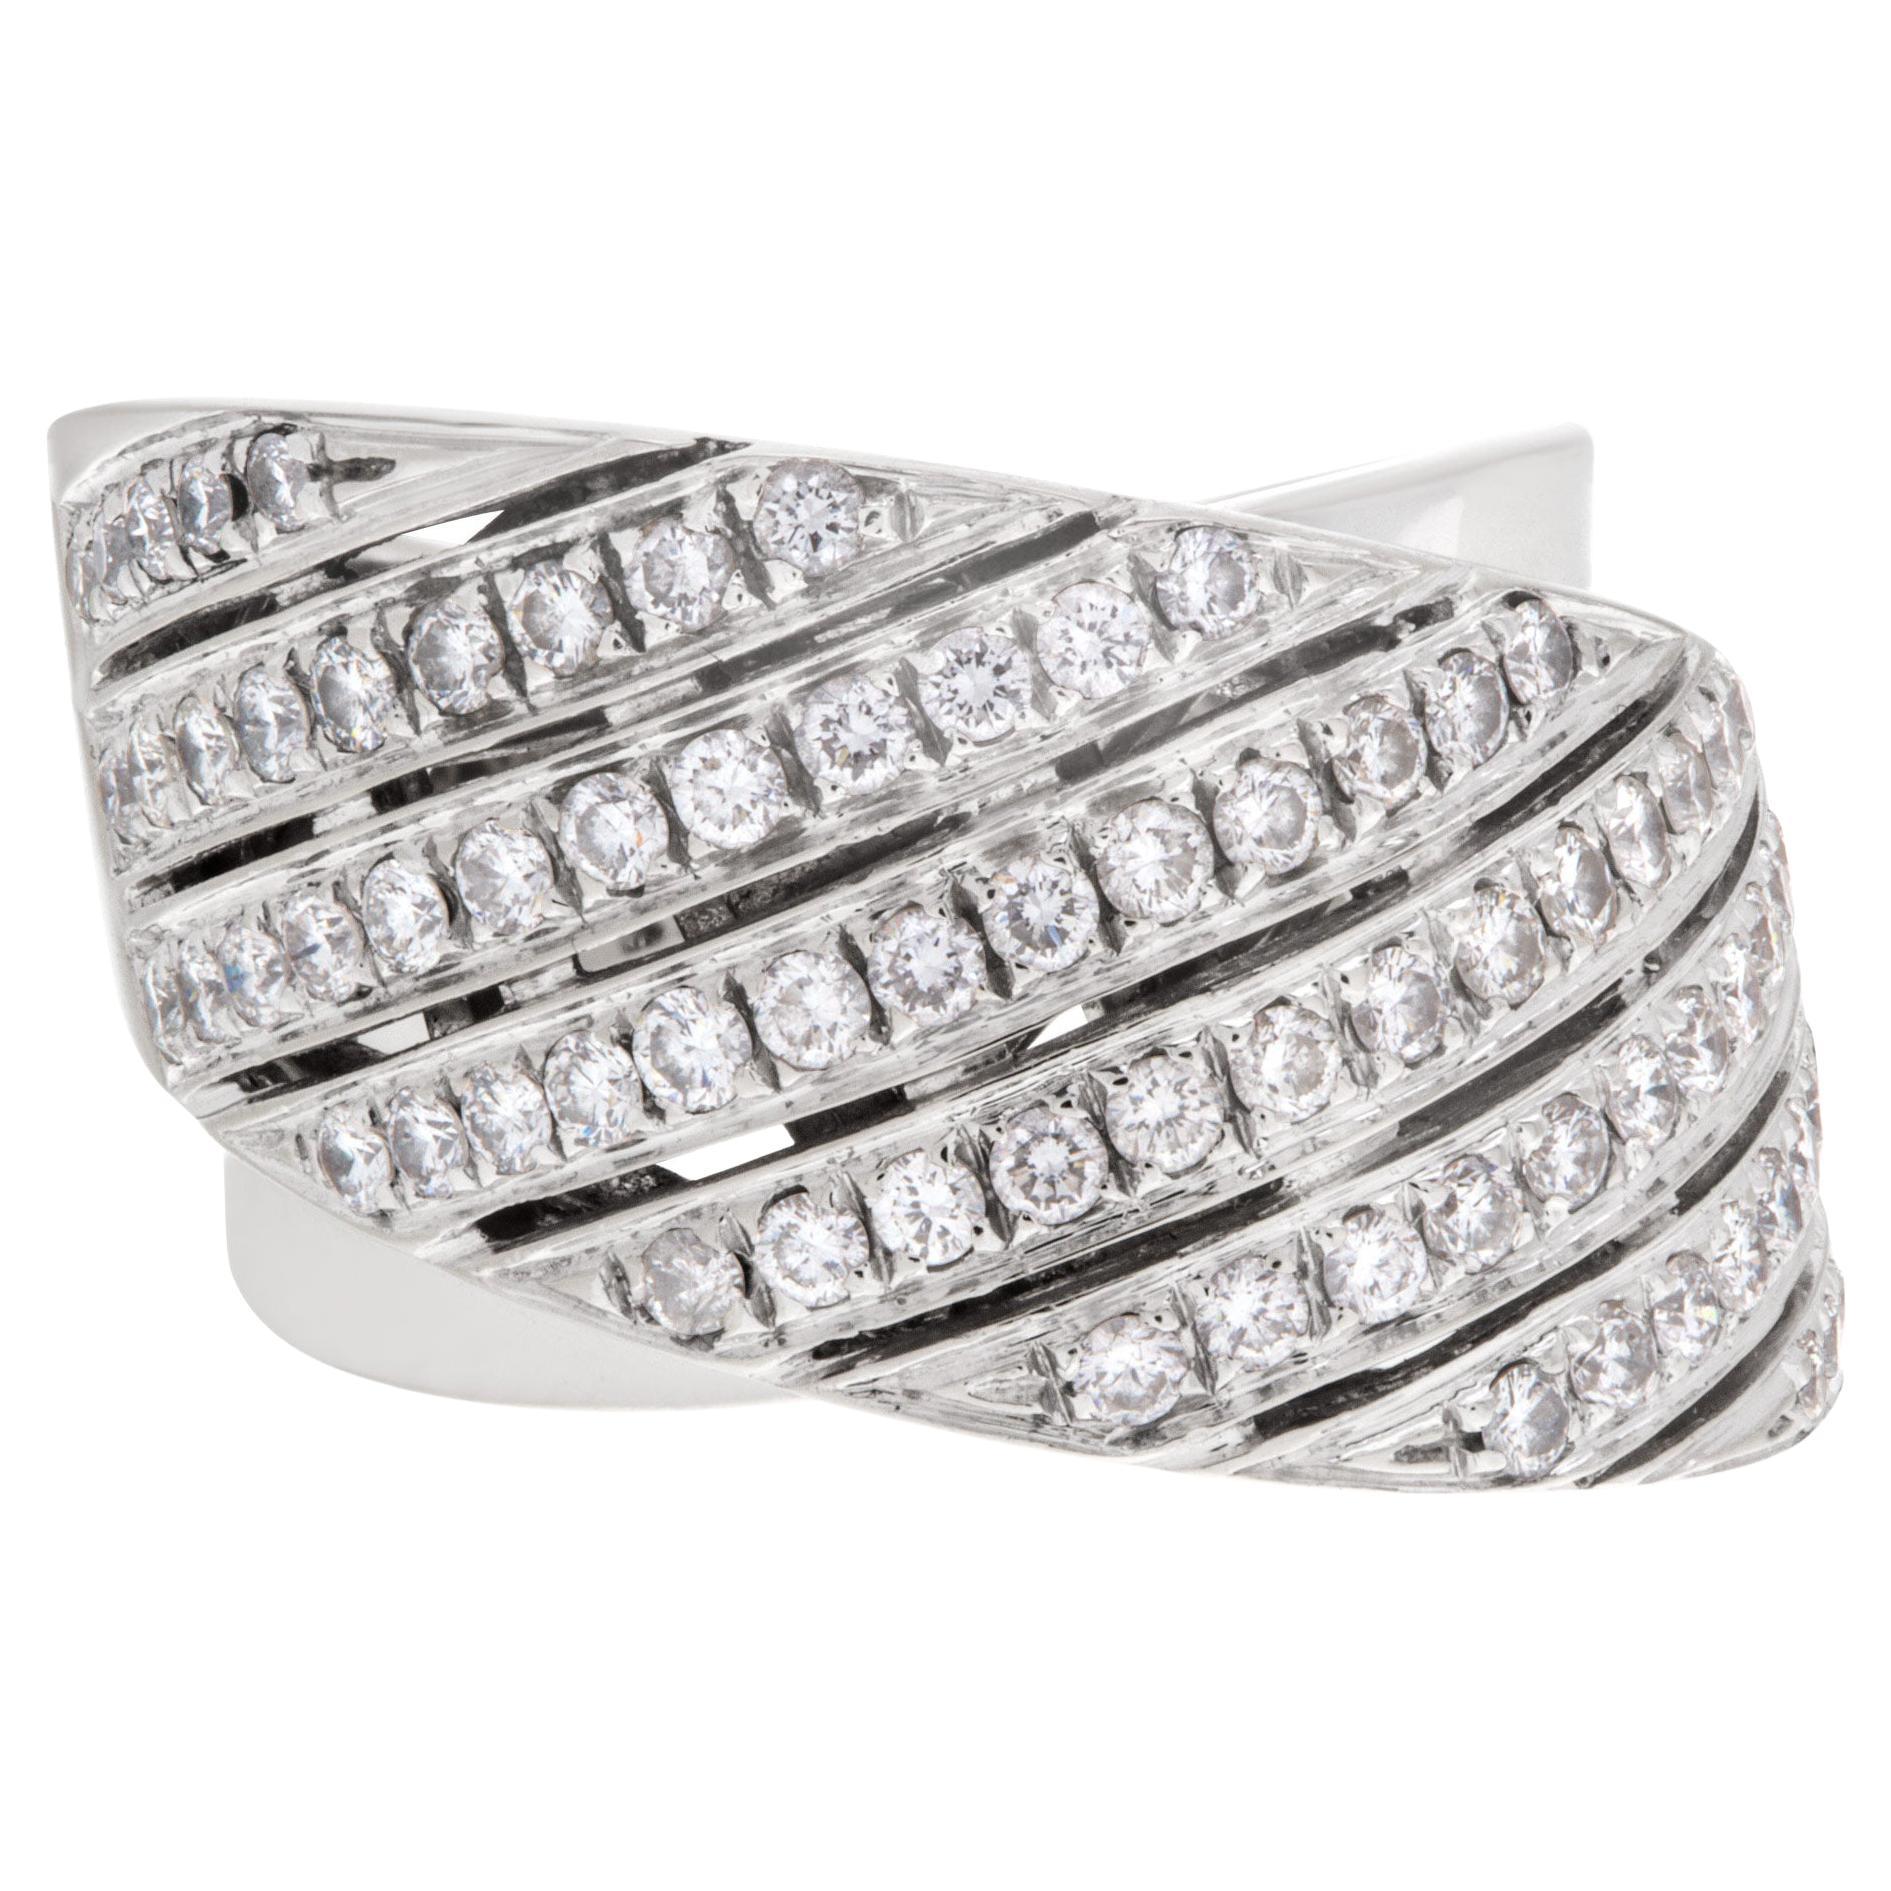 Contemporary Design Wide "Crisscross" Ring with 1.50 Carat Pave Diamonds Set For Sale